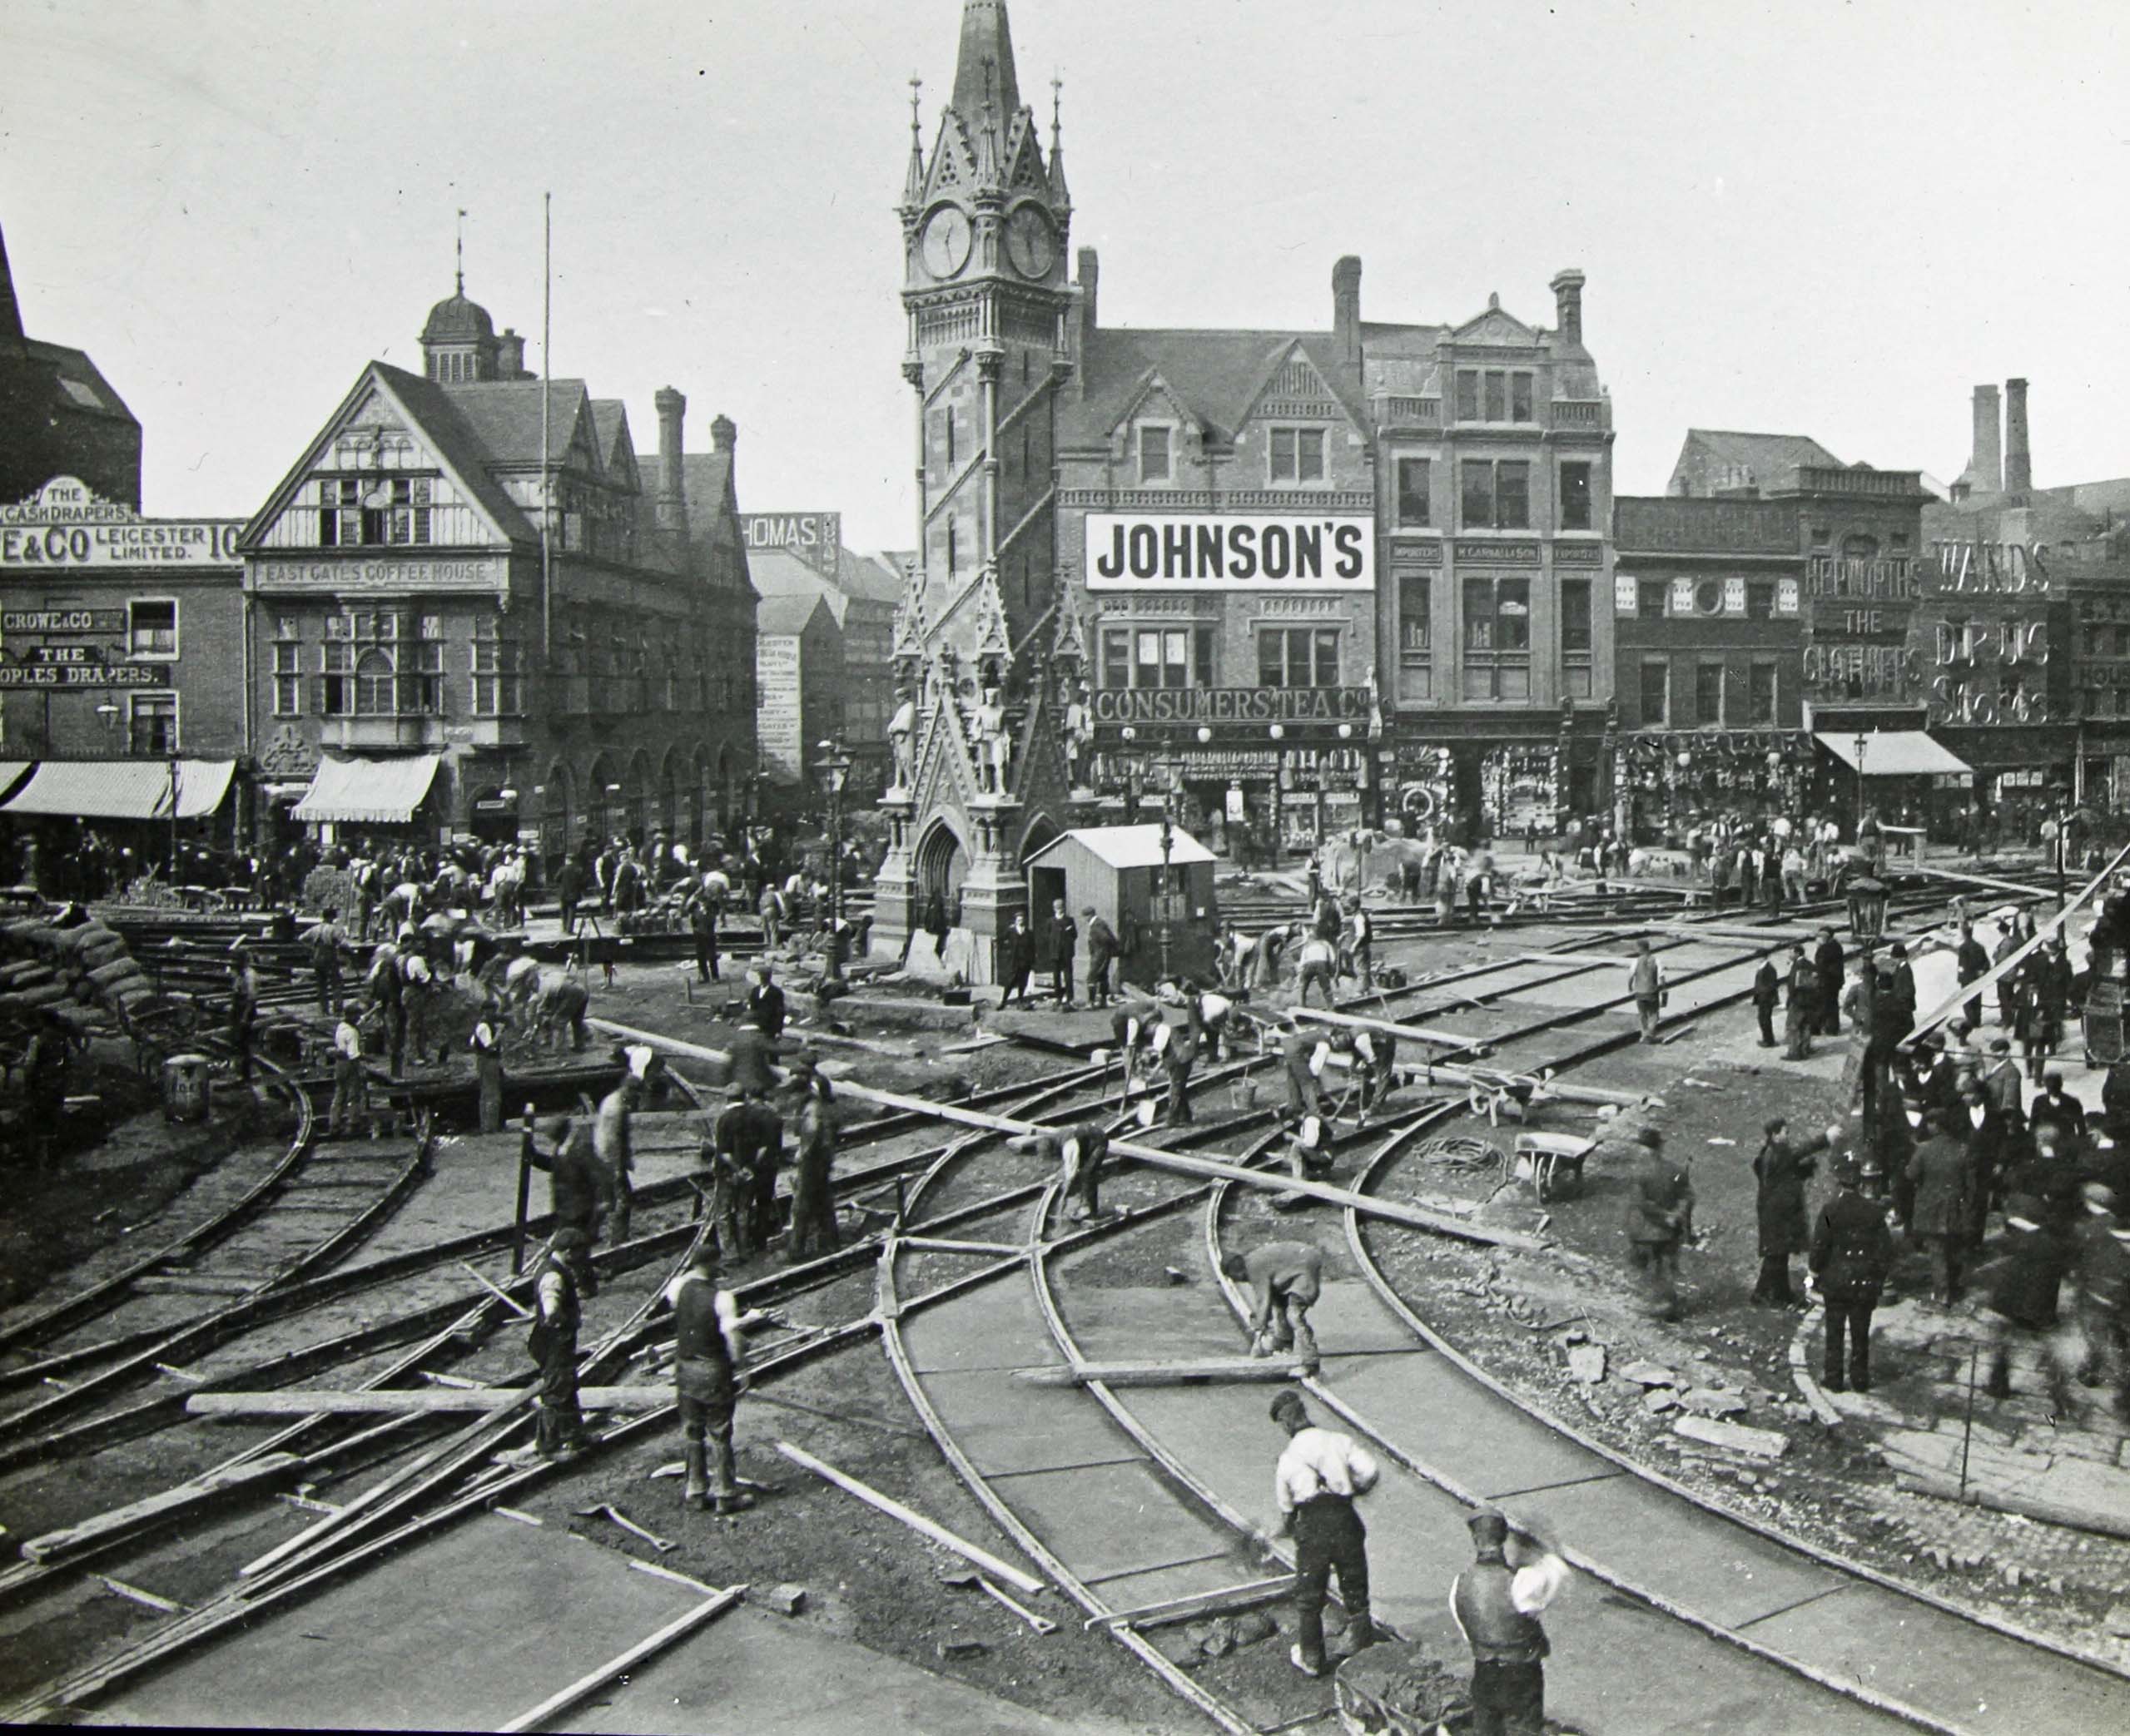 Laying tram tracks, 1903 - Leicestershire Record Office